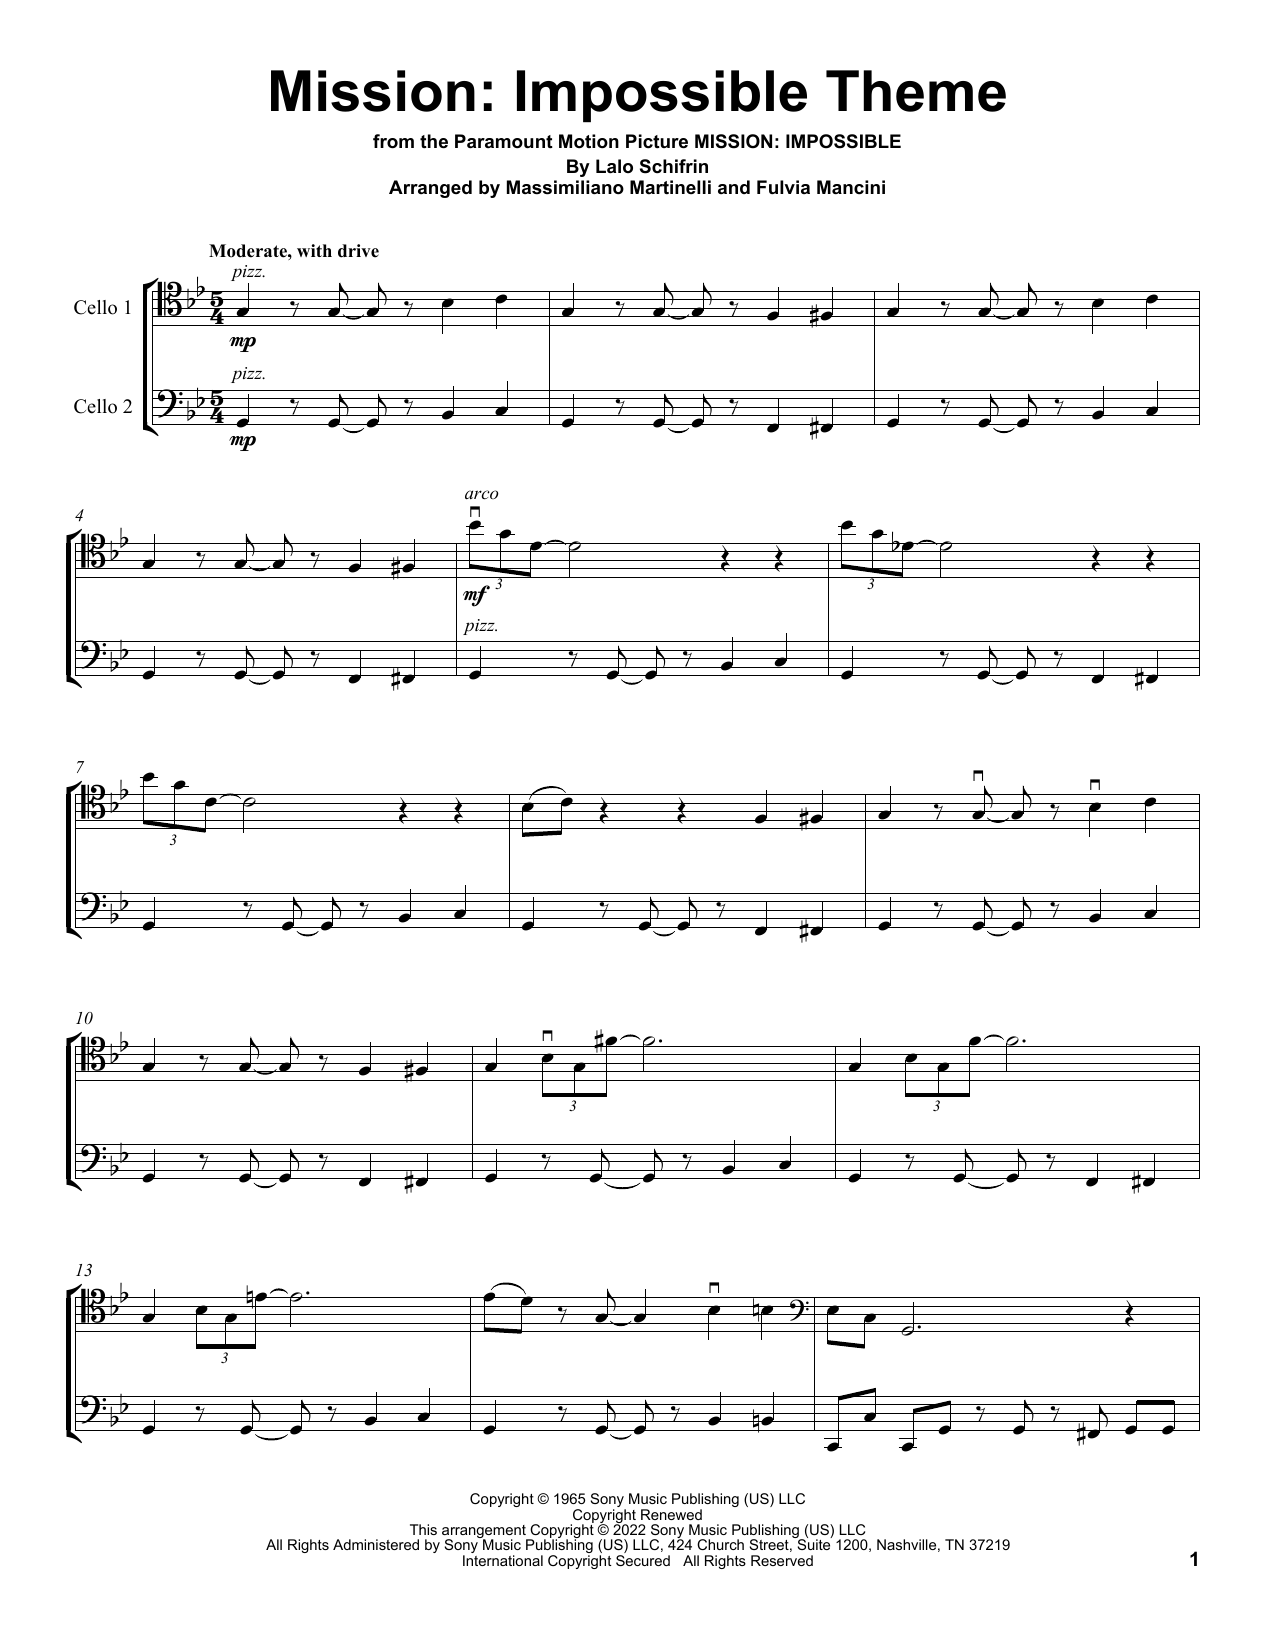 Download Mr & Mrs Cello Mission: Impossible Theme (from Mission Sheet Music